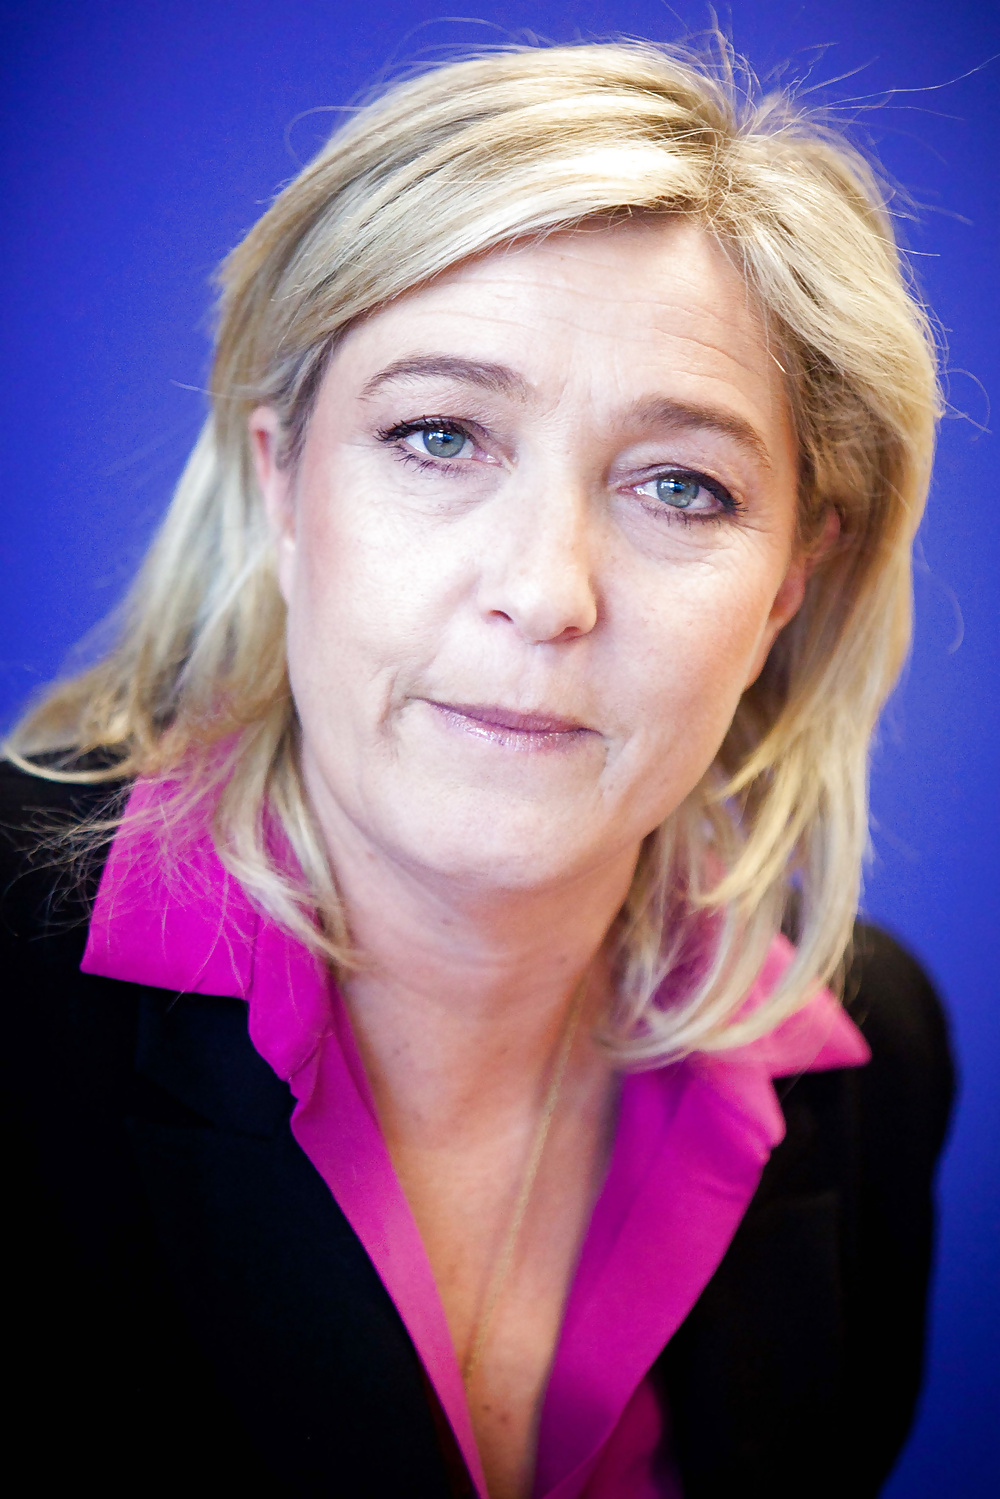 I adore jerking to sexy Marine Le Pen #35343830